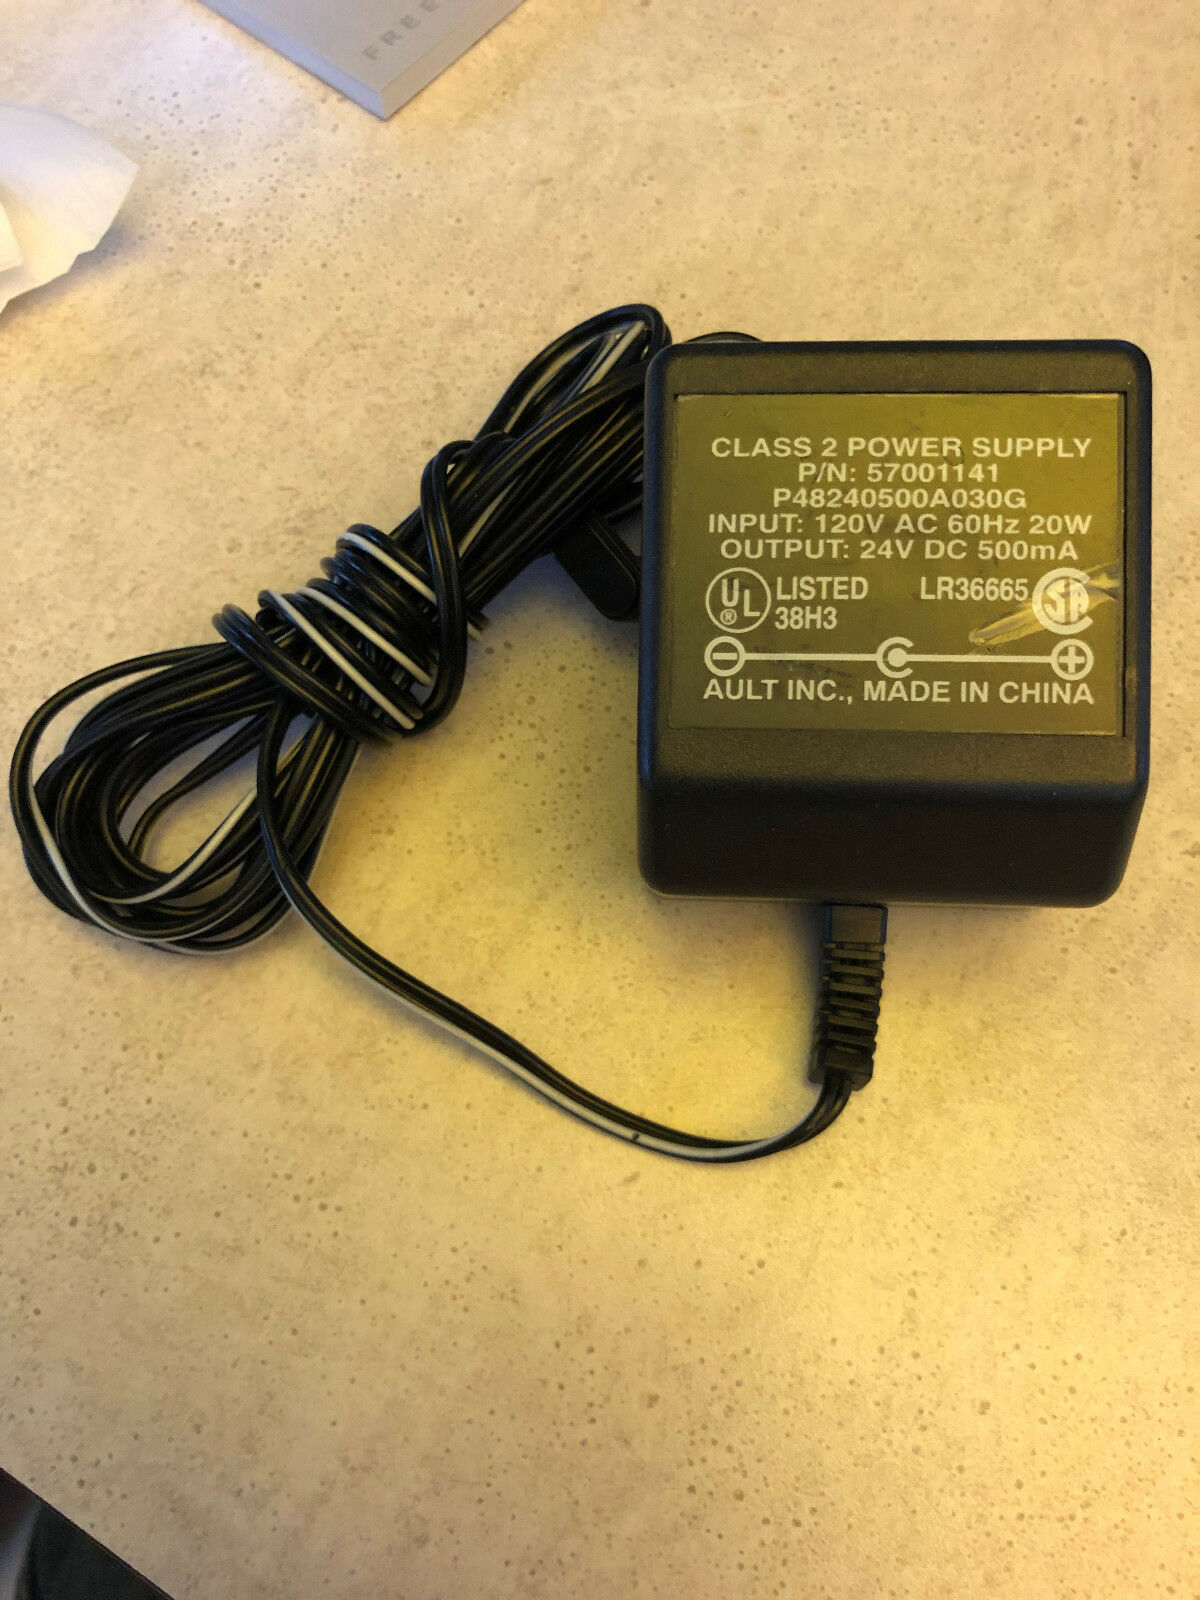 Brand New 24VDC 500mA LR36665 Power Supply for AULT P48240500A030G 570001141 ac adapter